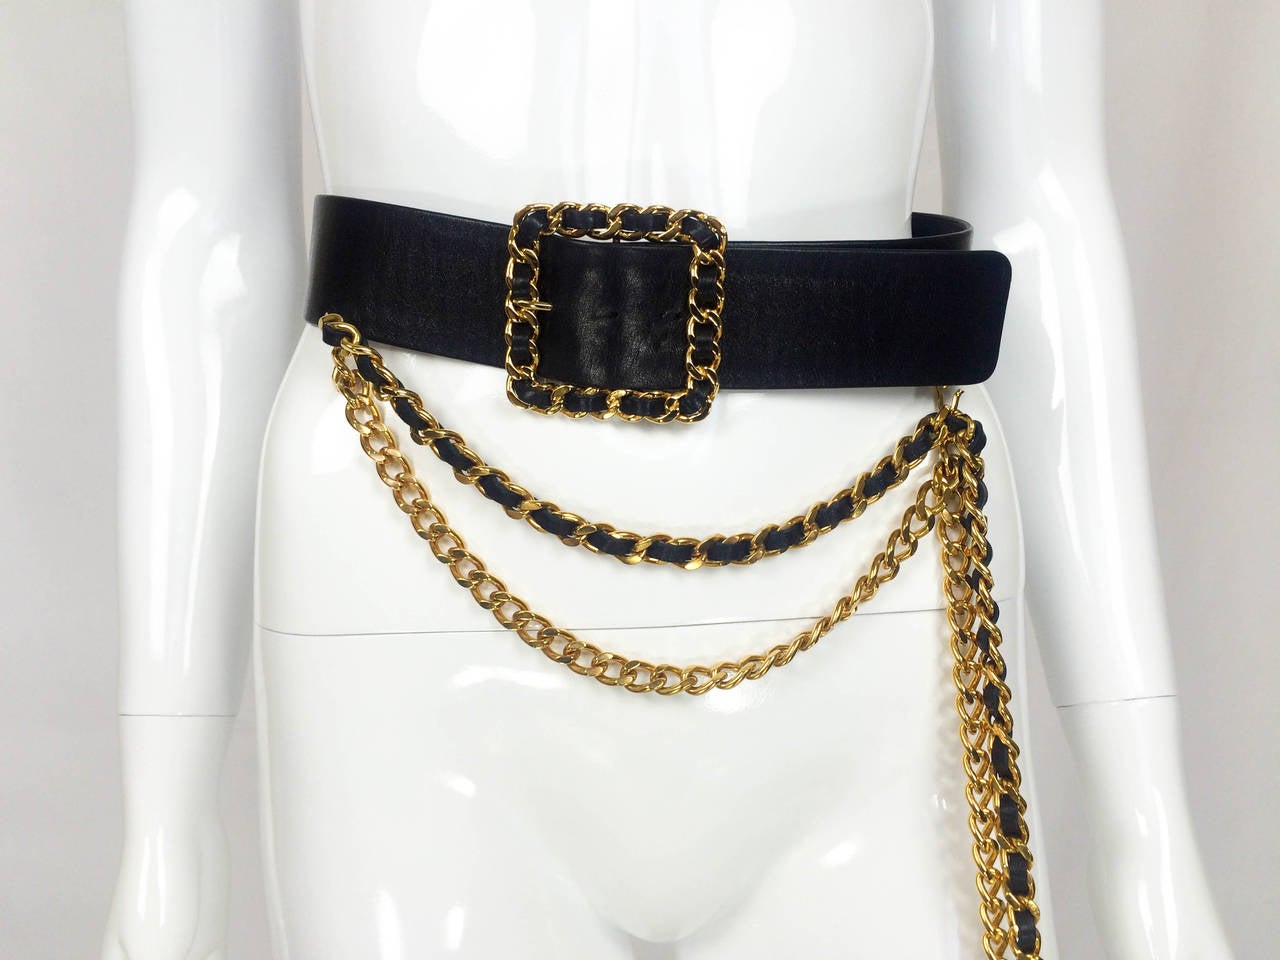 Women's Chanel 1992 Runway Black Leather and Gold Tone Metal Belt